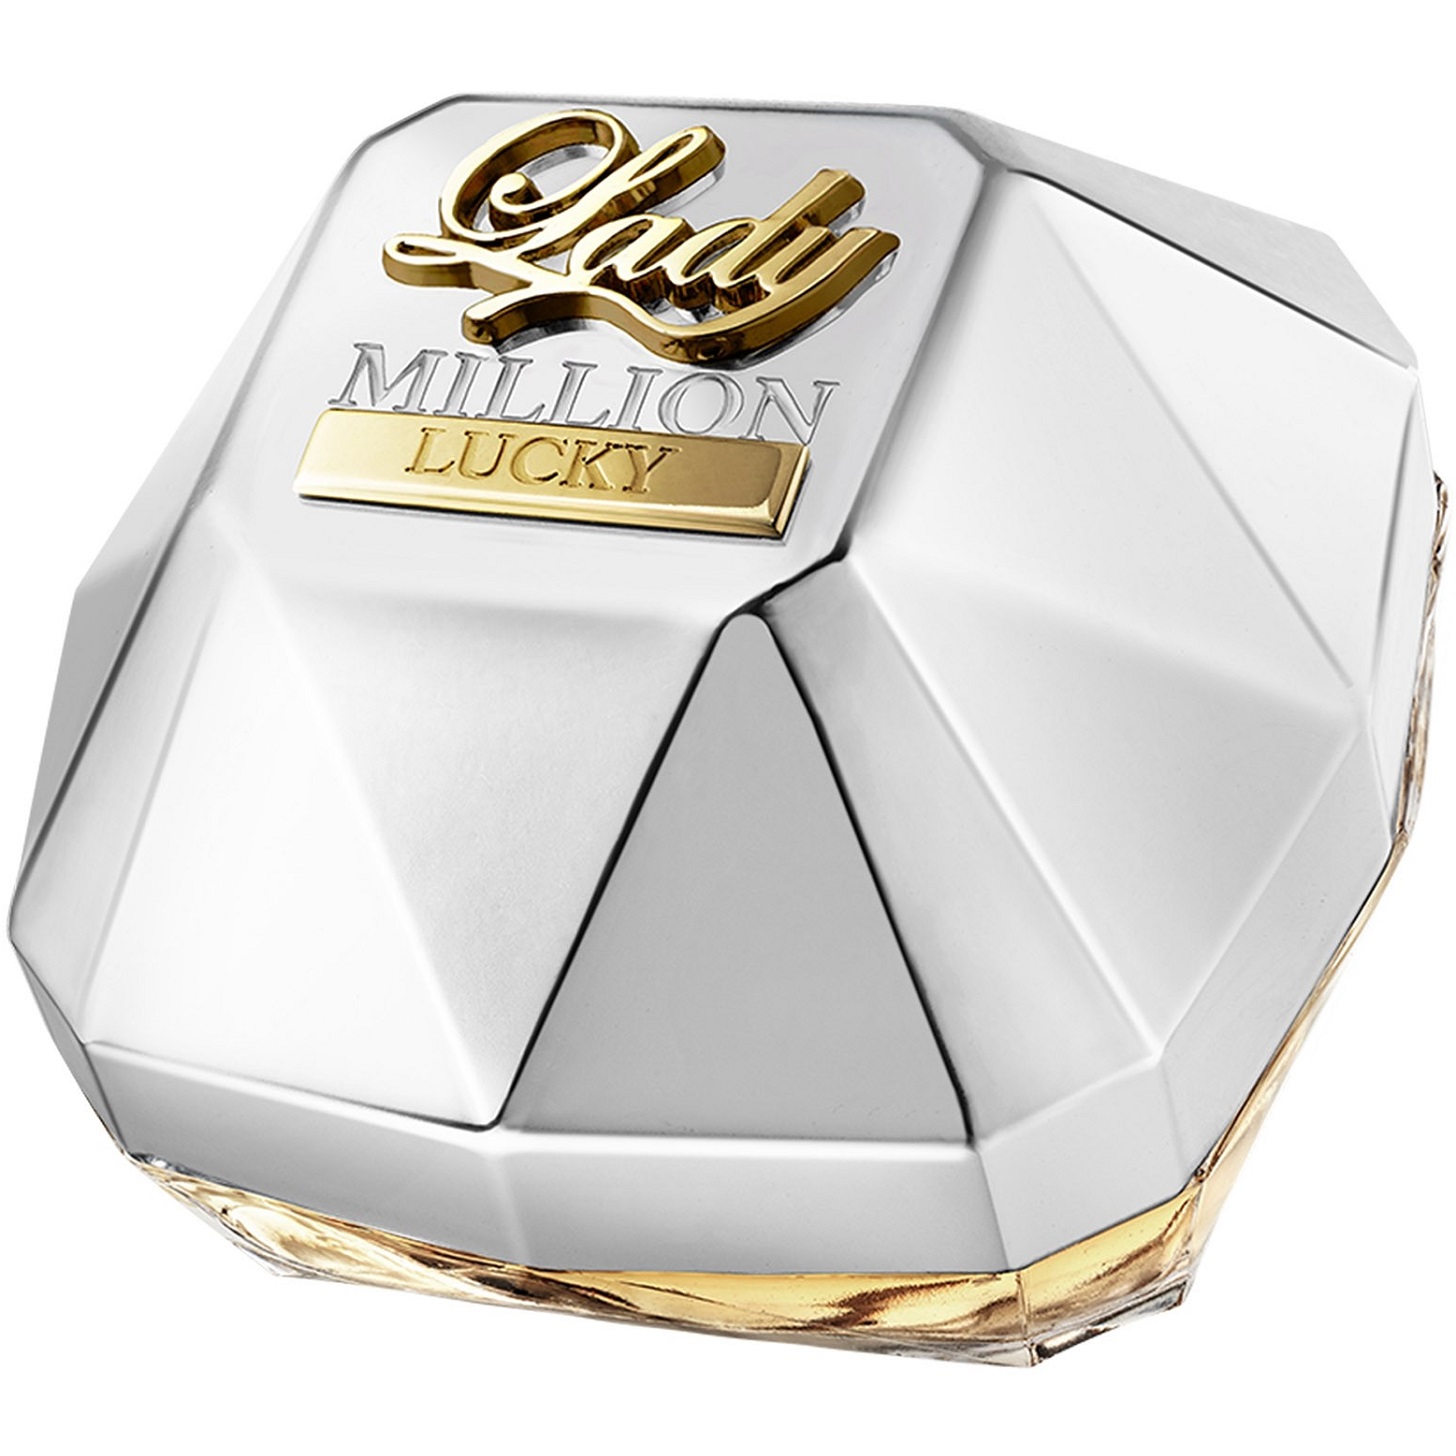 Paco Rabanne - Lady Million Lucky (2мл)